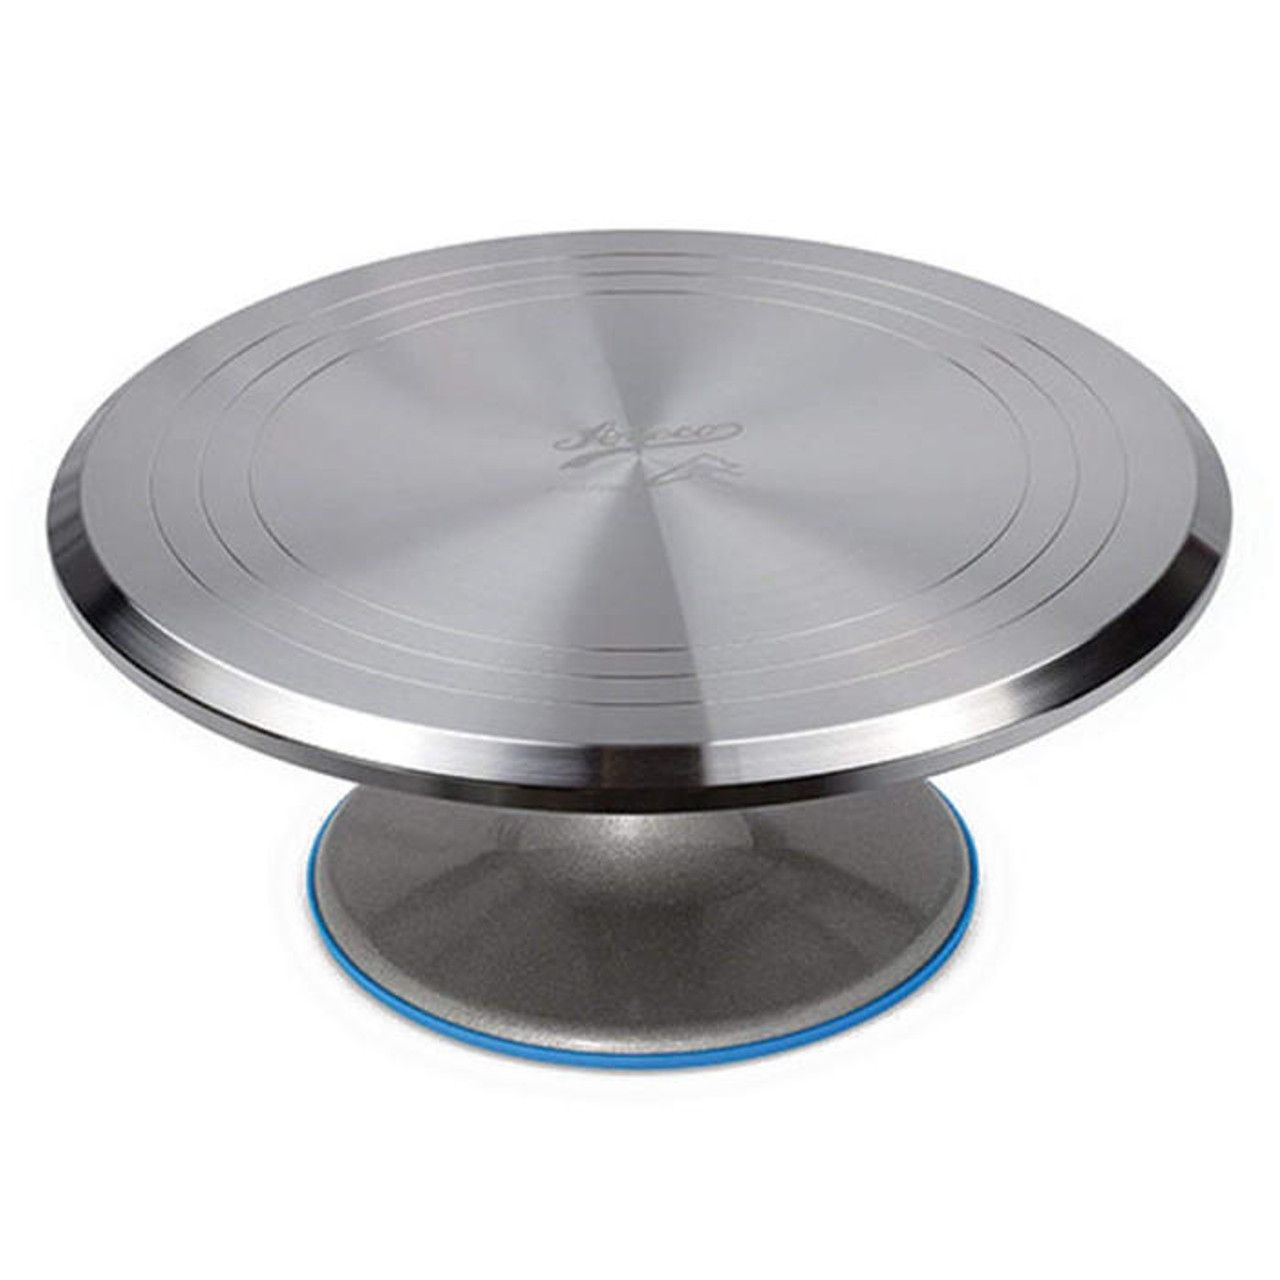 Top more than 170 spinning cake stand best